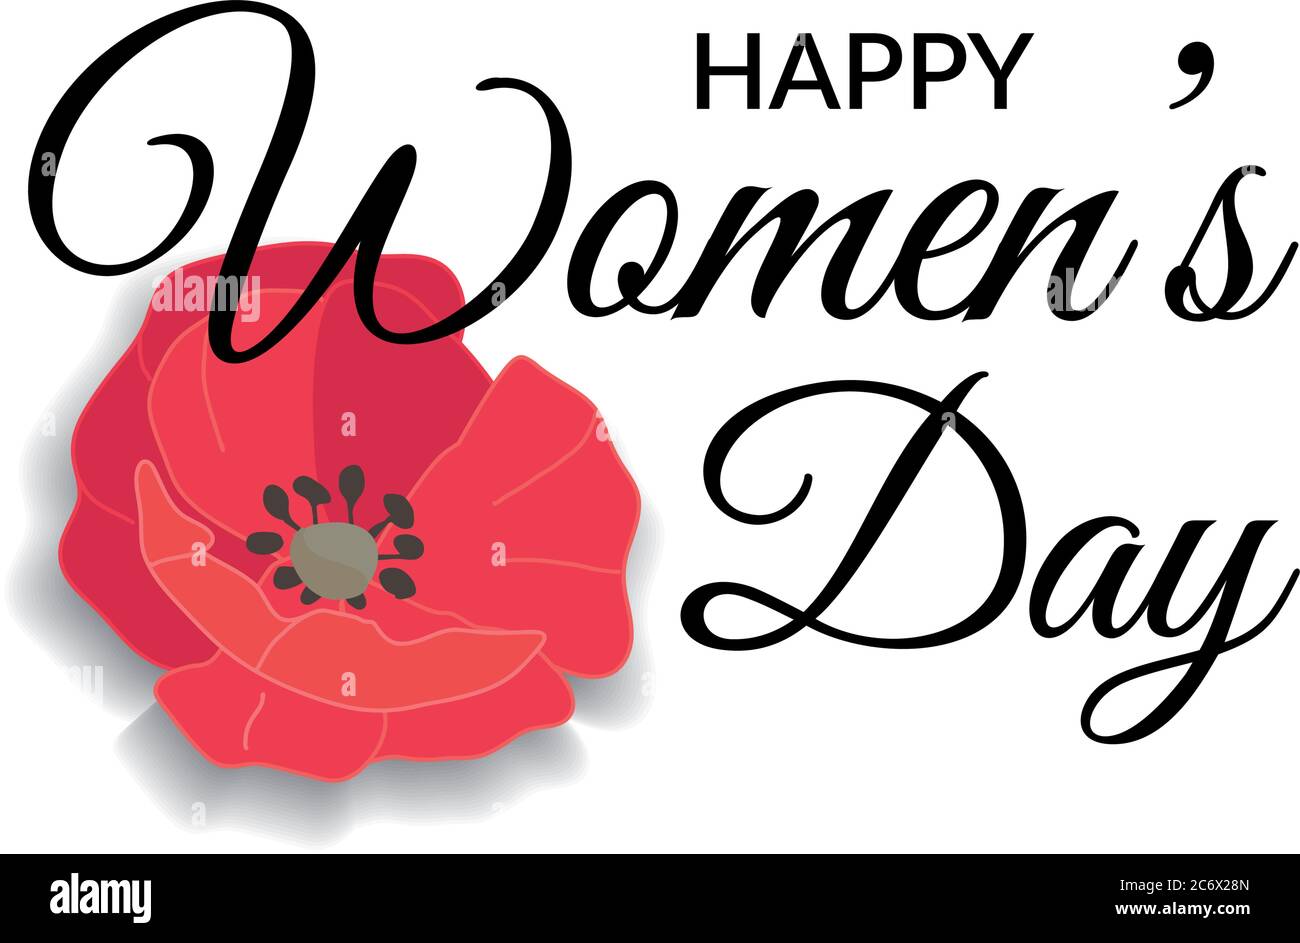 Womens day Greeting Card. Lettering Calligraphic Design in black isolated on white background with red field poppy or rose flower. Happy Womens day Stock Vector